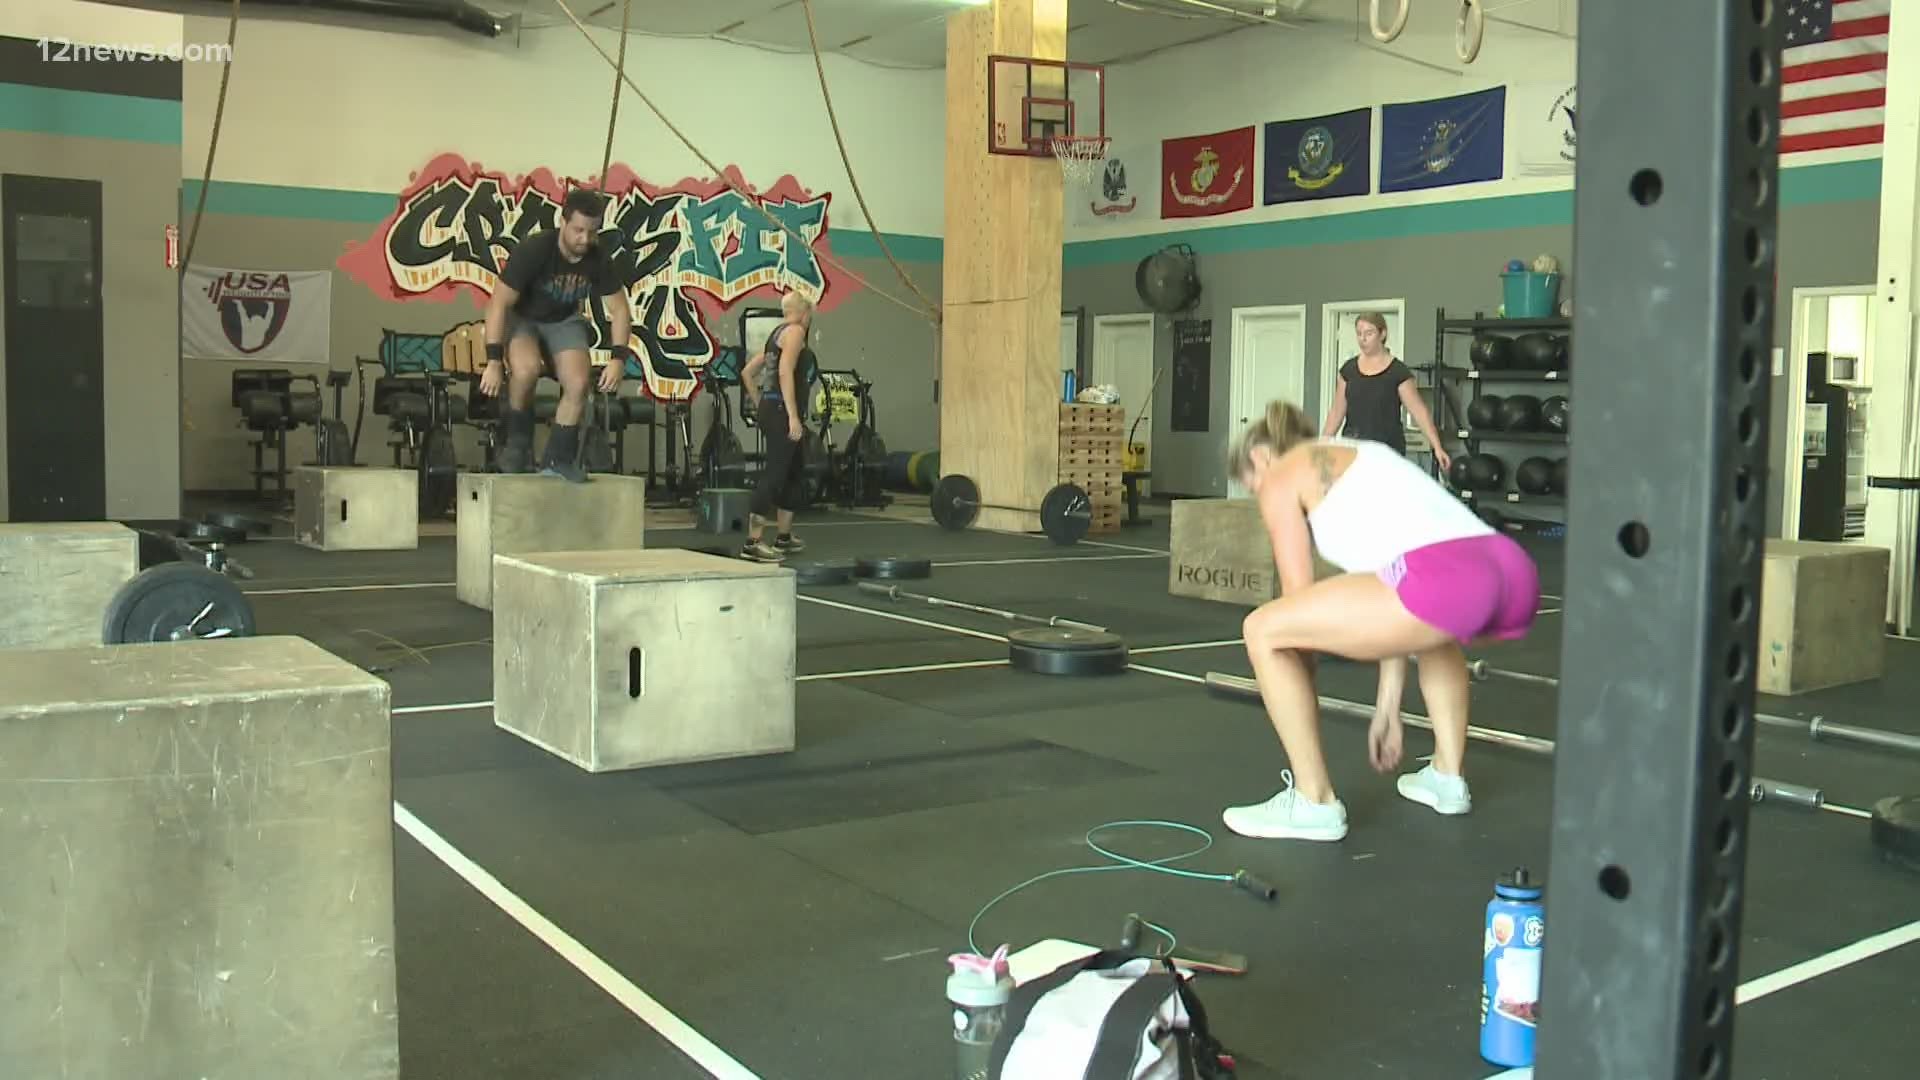 One thing so many people have been waiting on to reopen are gyms. For one Valley CrossFit gym, the reopening comes just in time to save the business.